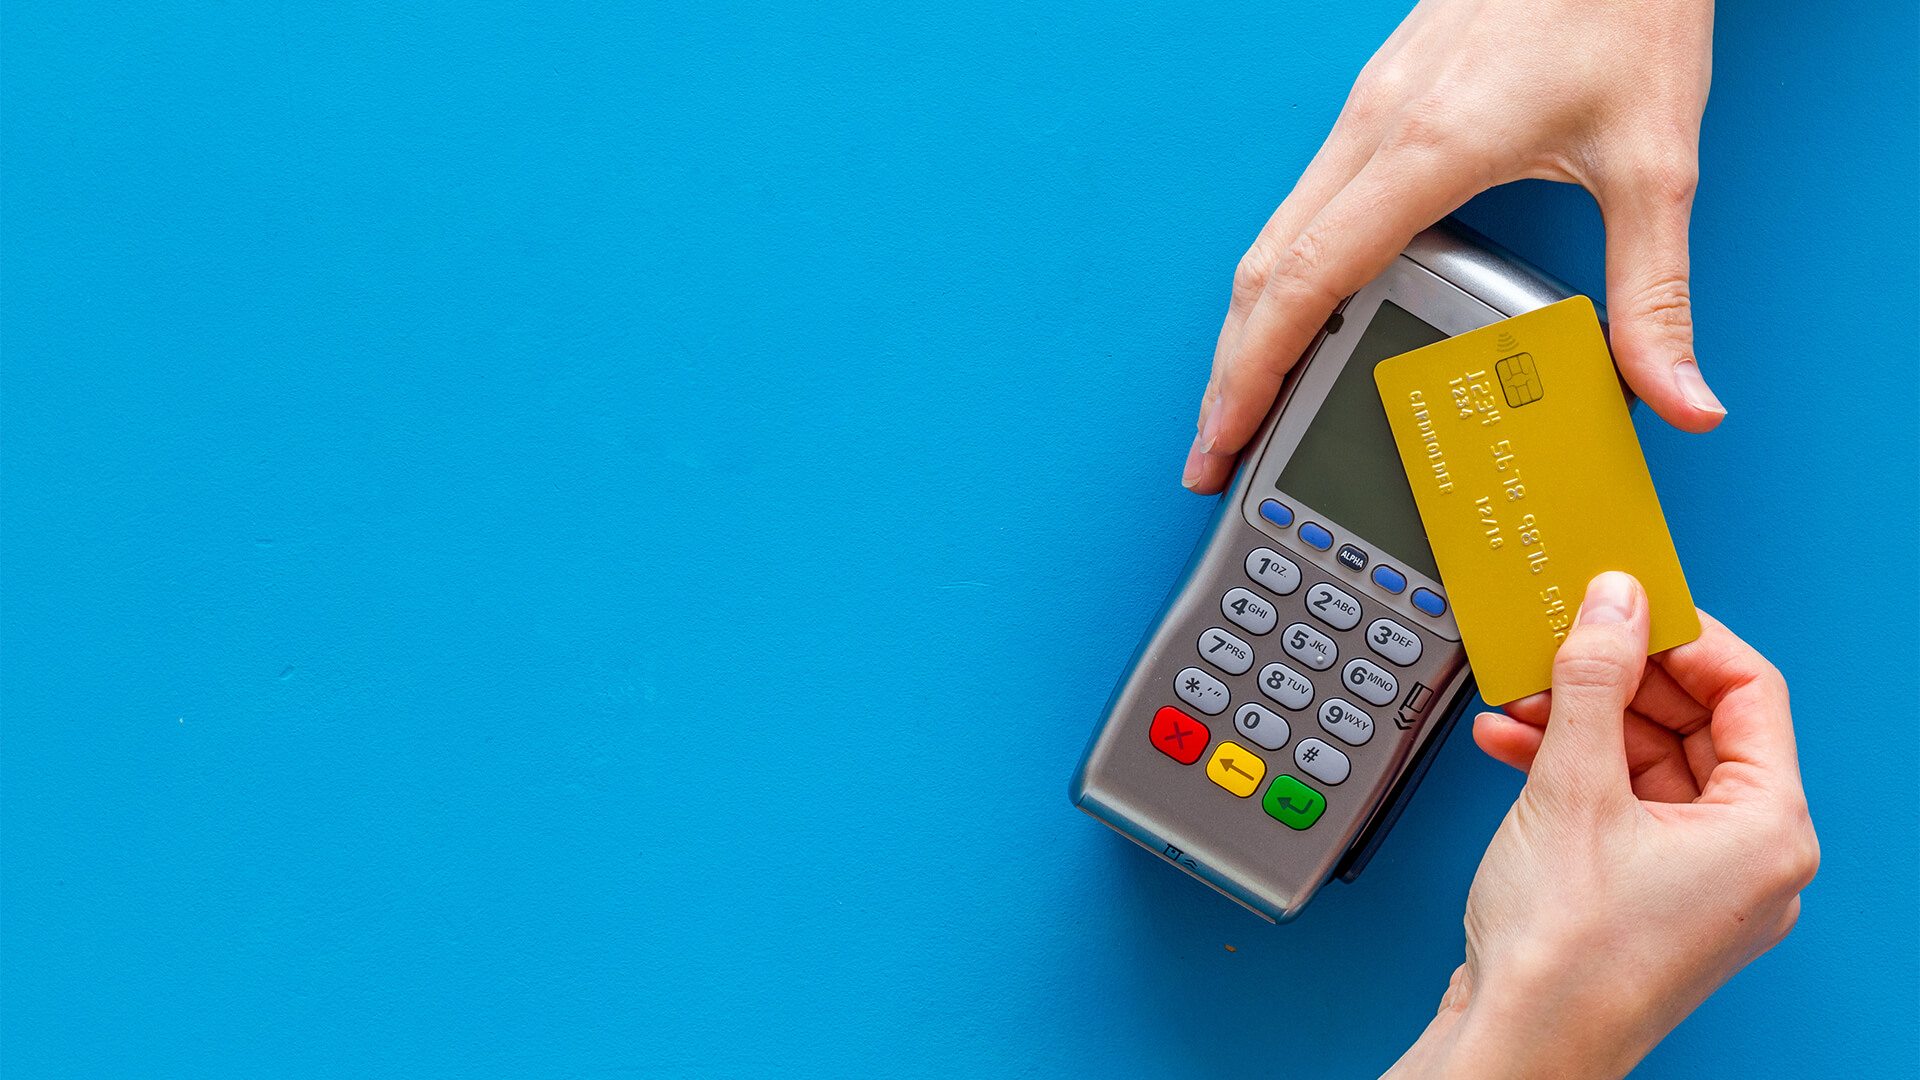 Closeup of hands using contactless payment and credit card against a blue background